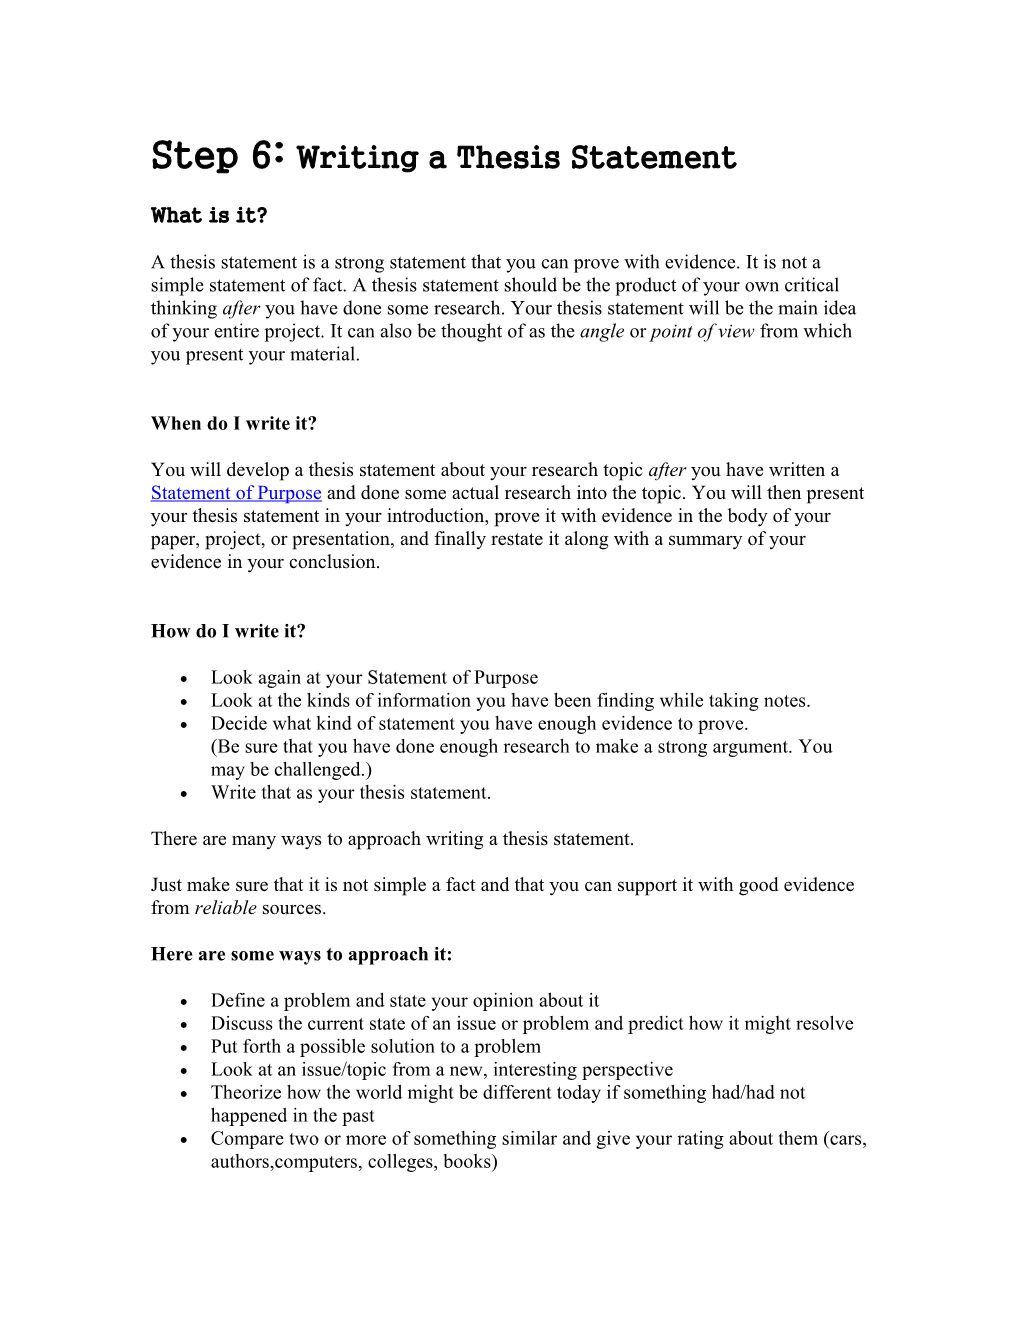 Step 6: Writing a Thesis Statement